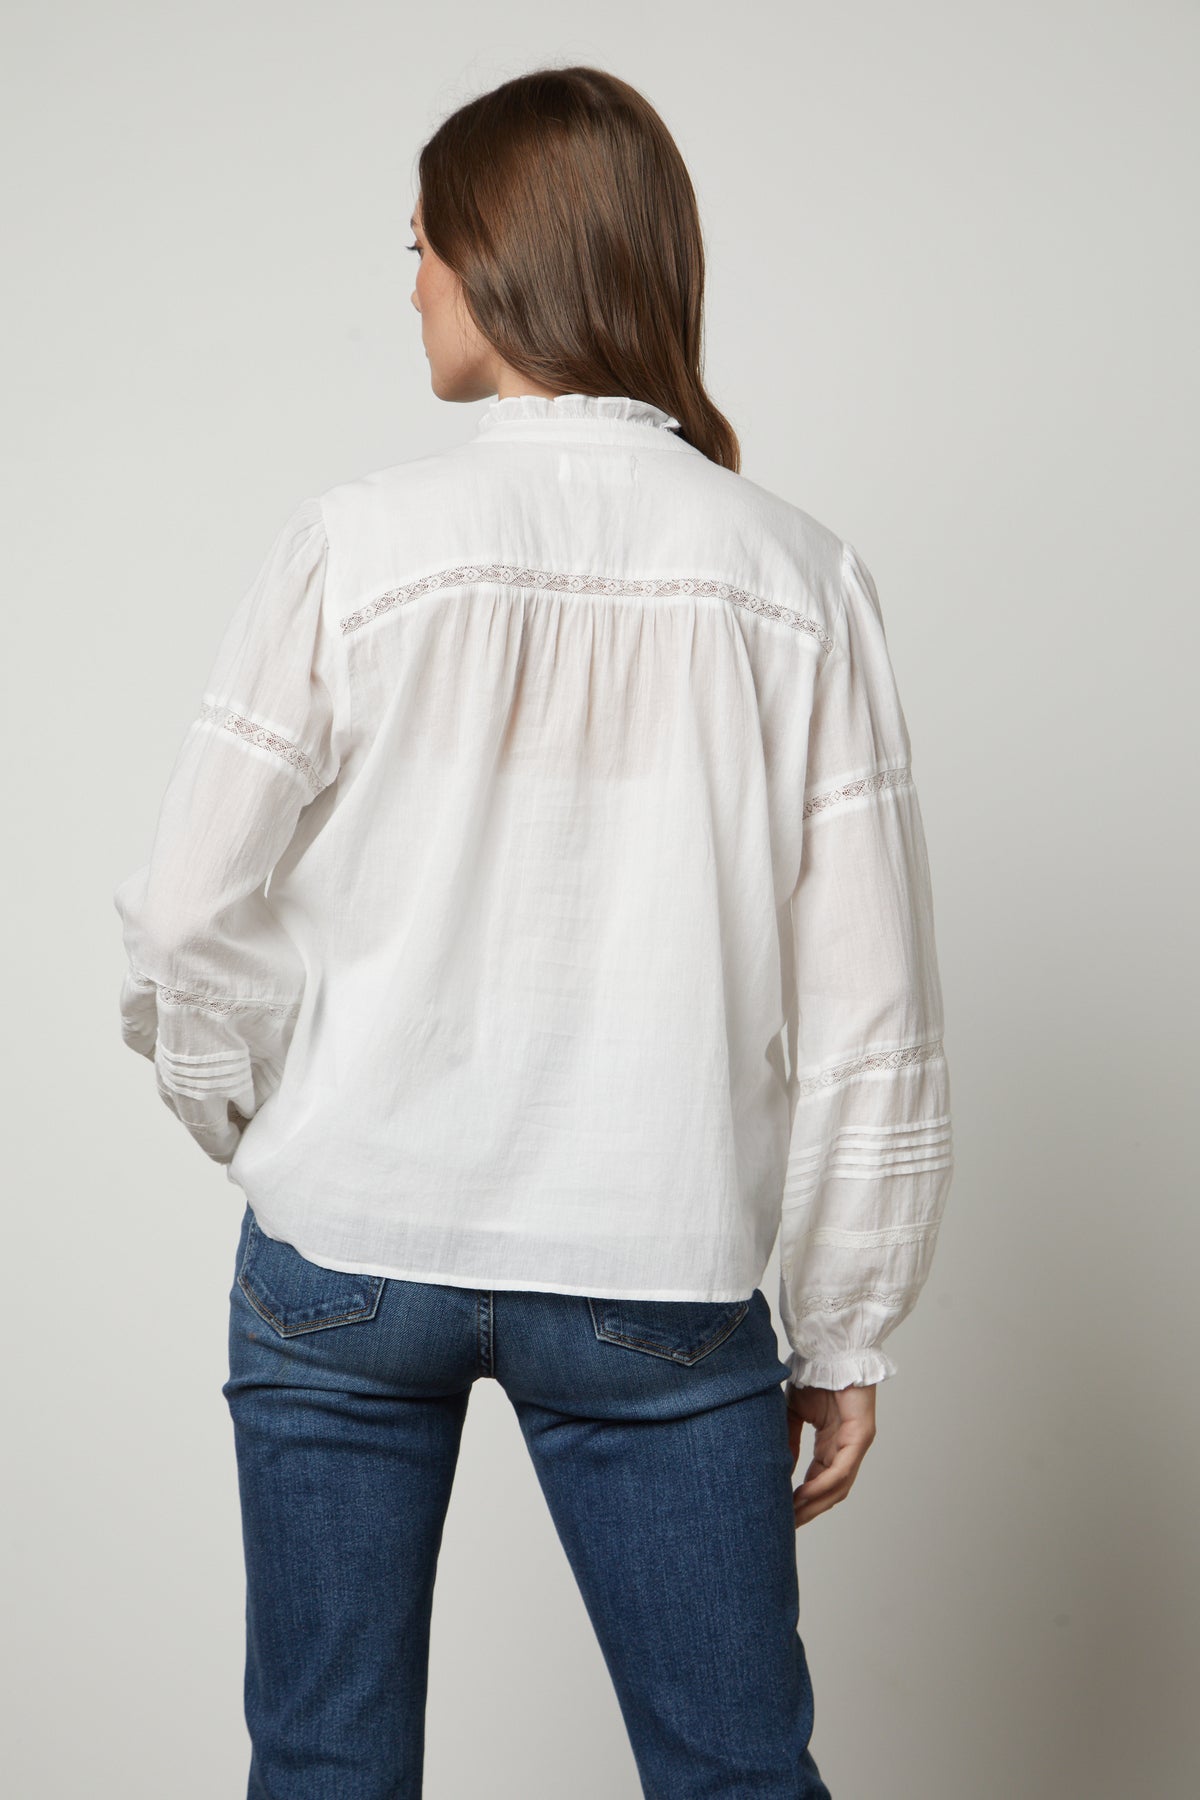   The back view of a woman wearing a Velvet by Graham & Spencer ROMY LACE BOHO TOP and jeans. 